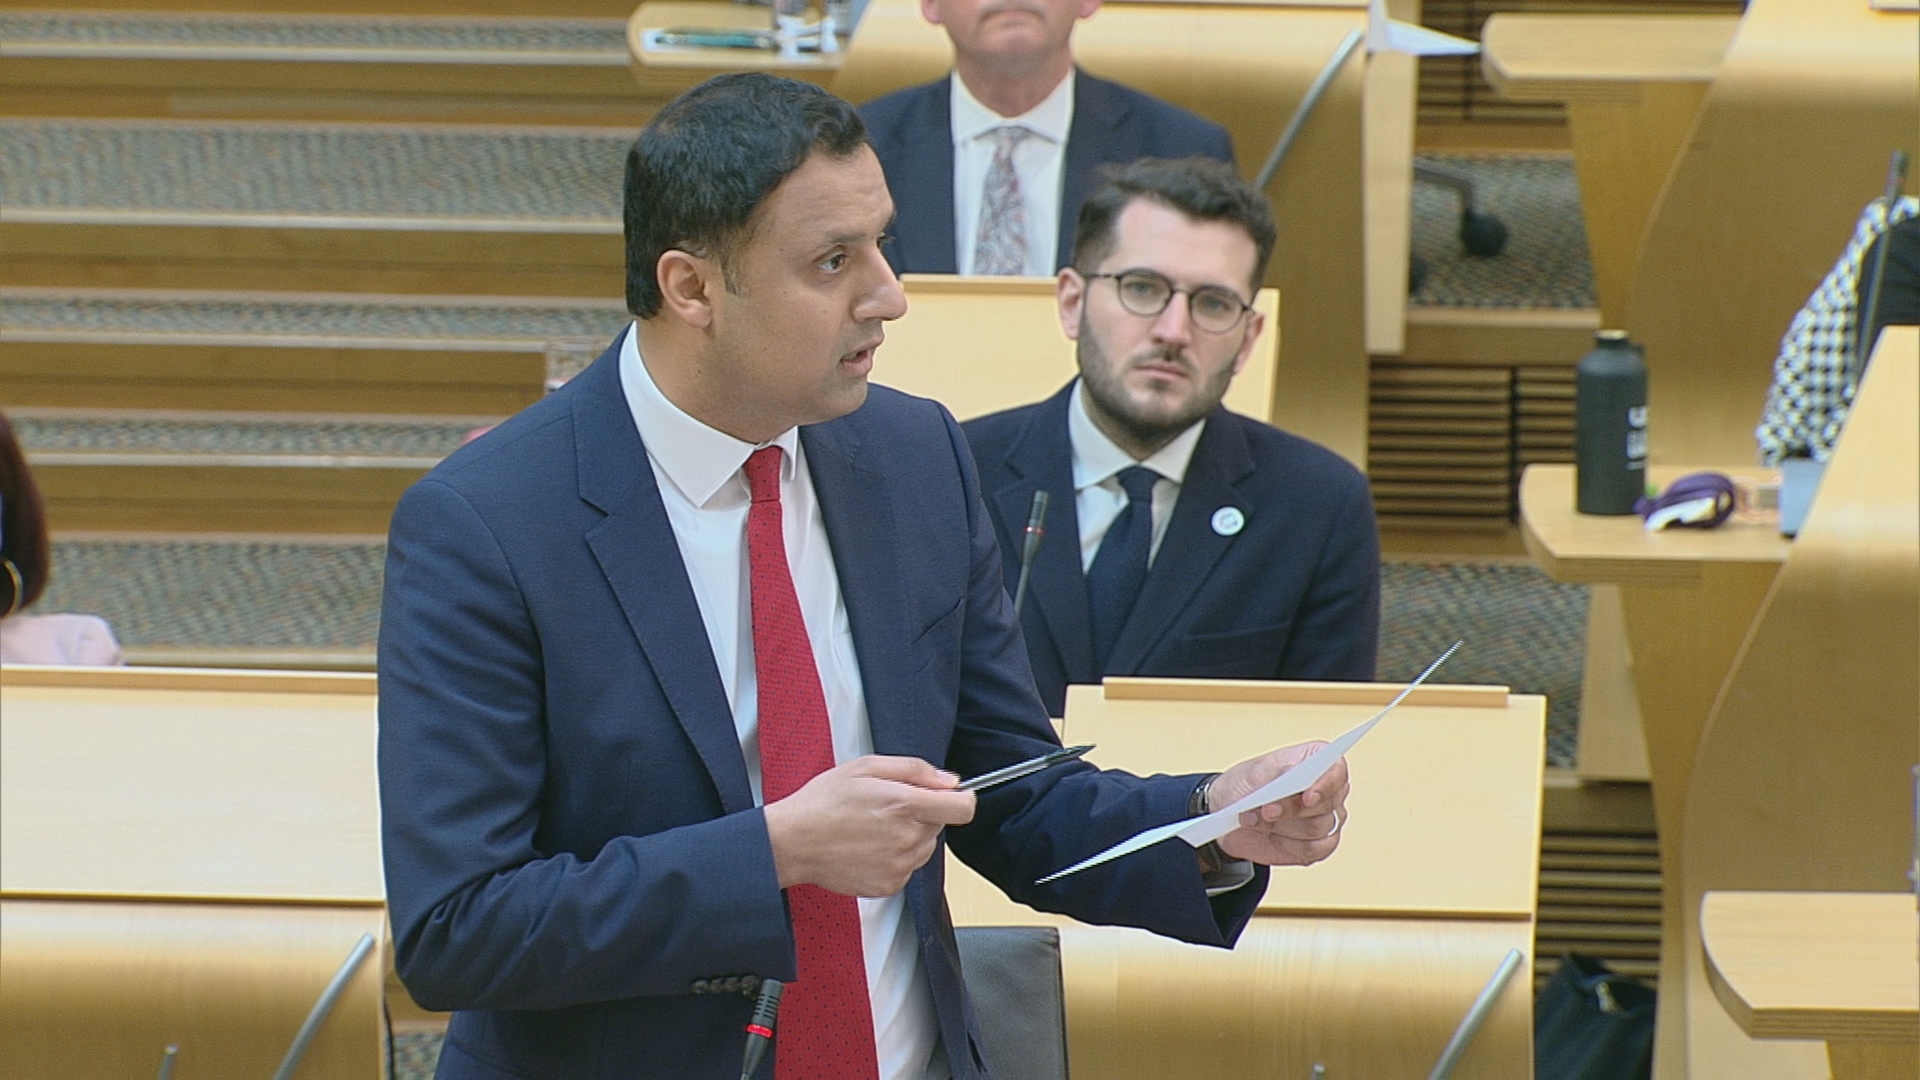 Anas Sarwar questioned the First Minister on Covid patients being moved to care homes.